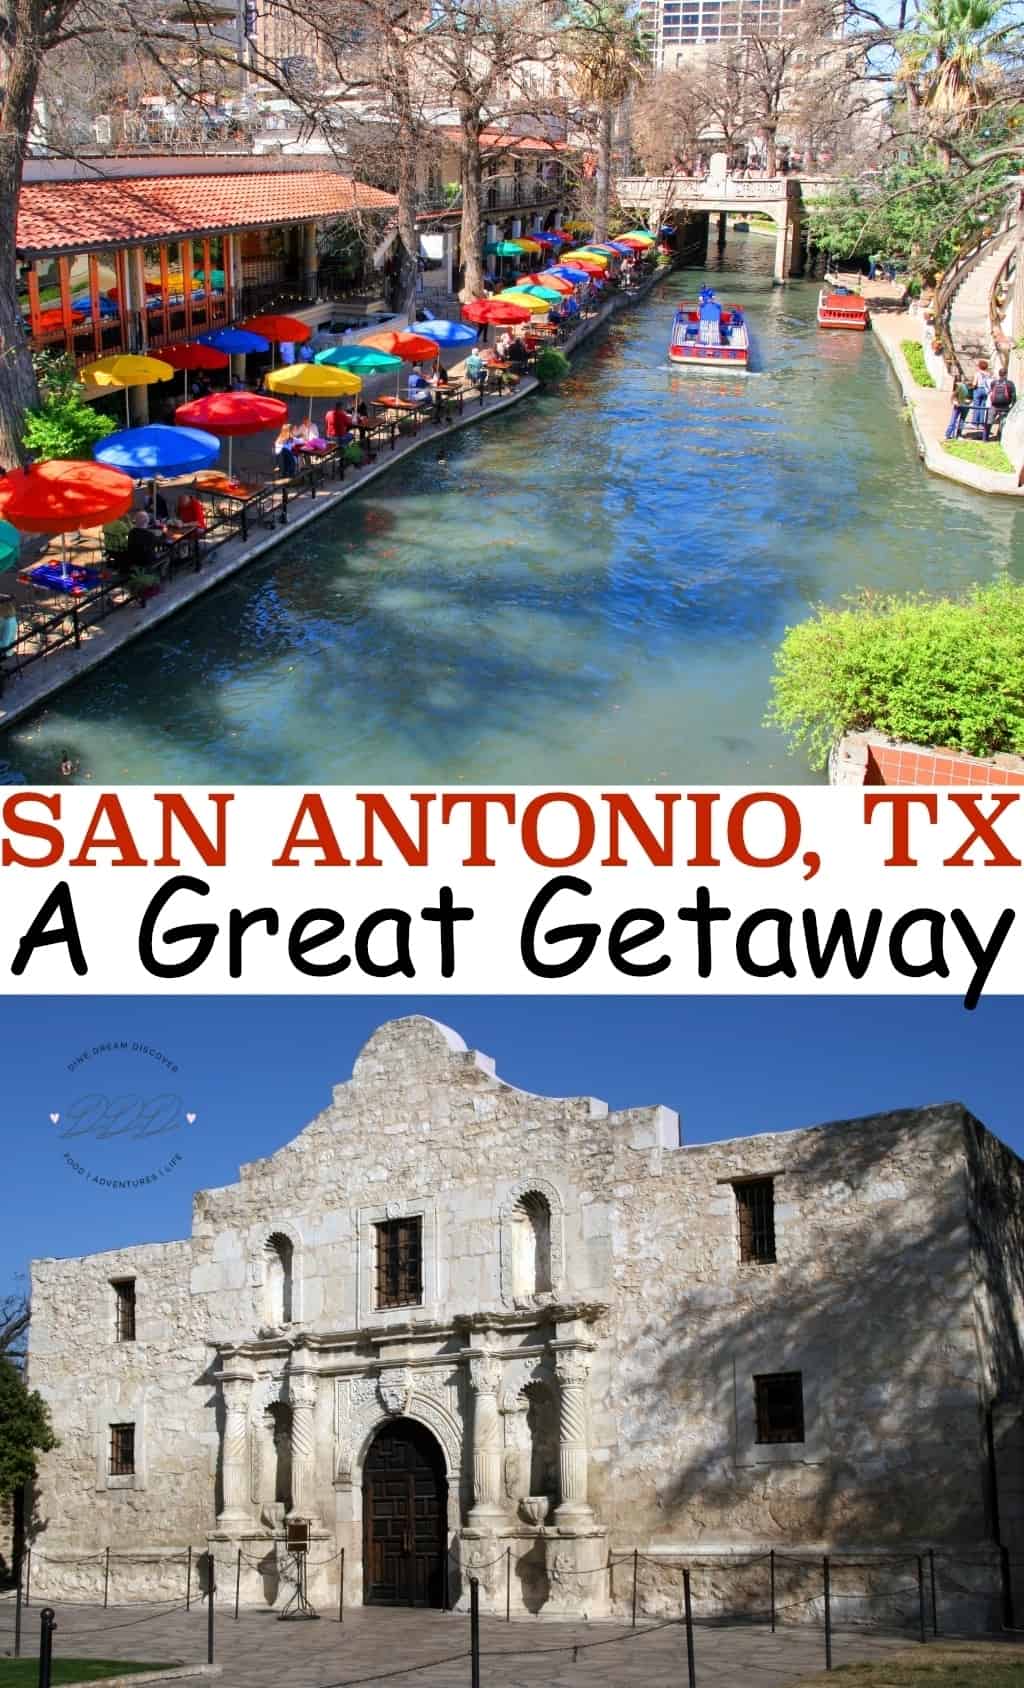 San Antonio is best described as a vibrant world famous destination with tons of character and historic charm especially the world famous River Walk.